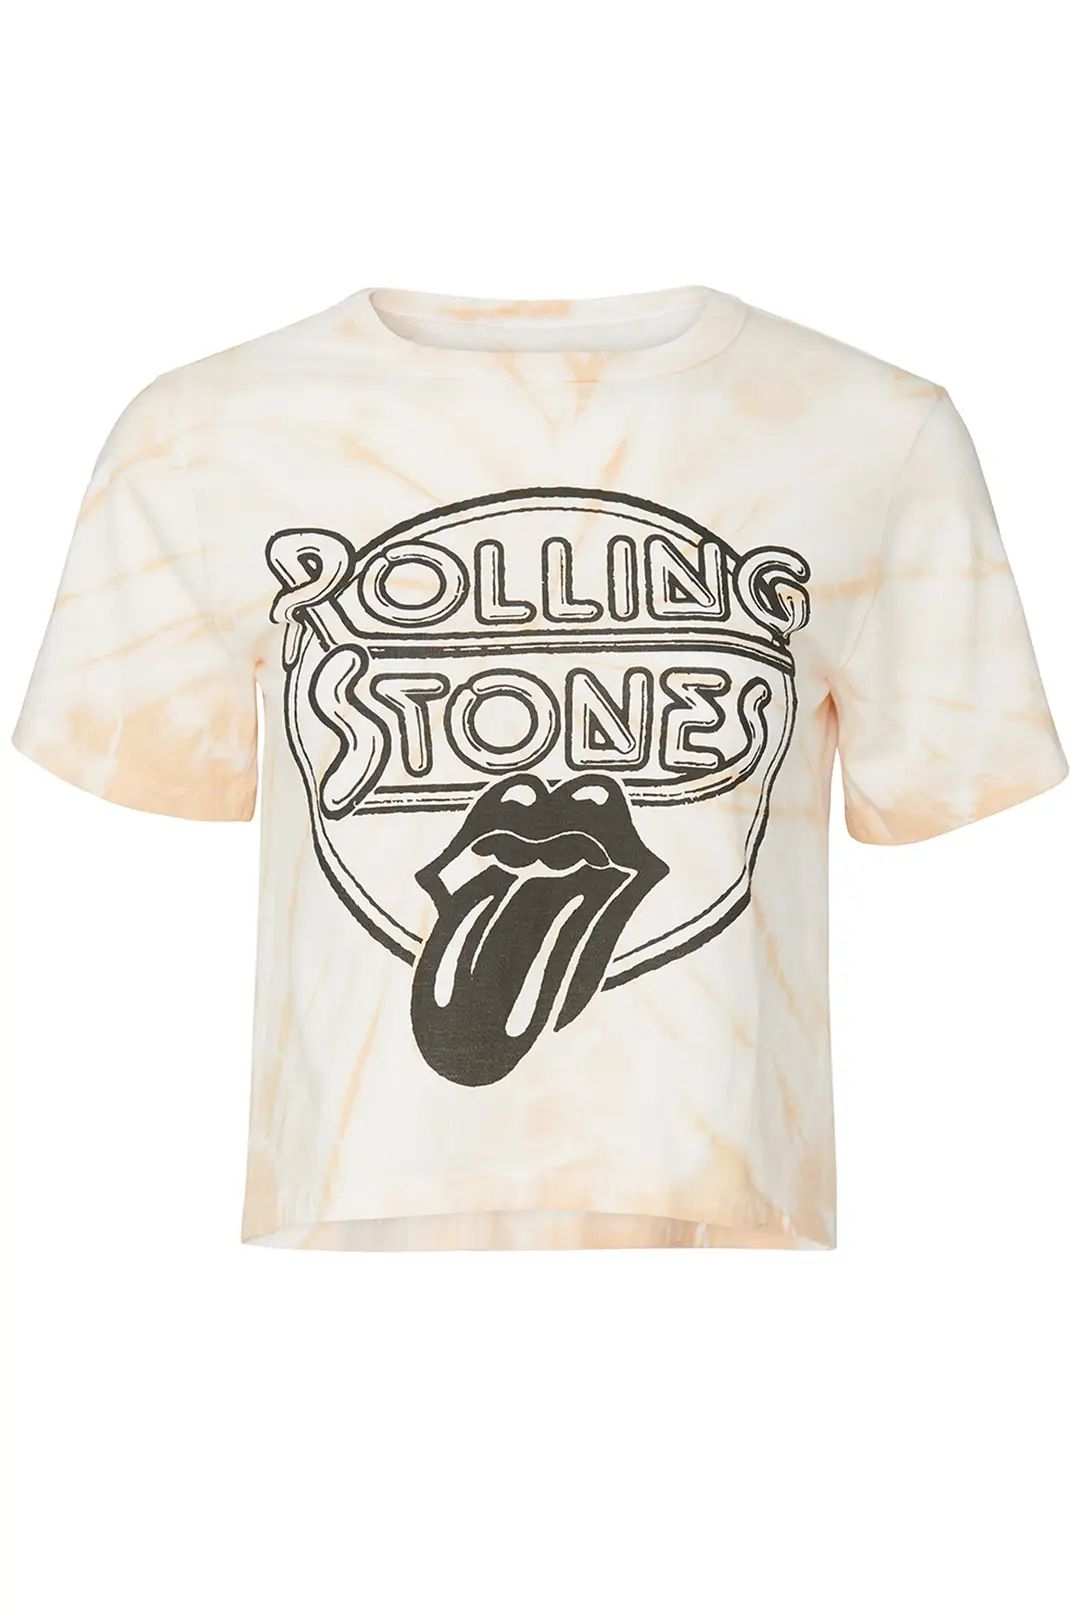 DAYDREAMER Rolling Stones Retro Tongue Tee | Rent The Runway